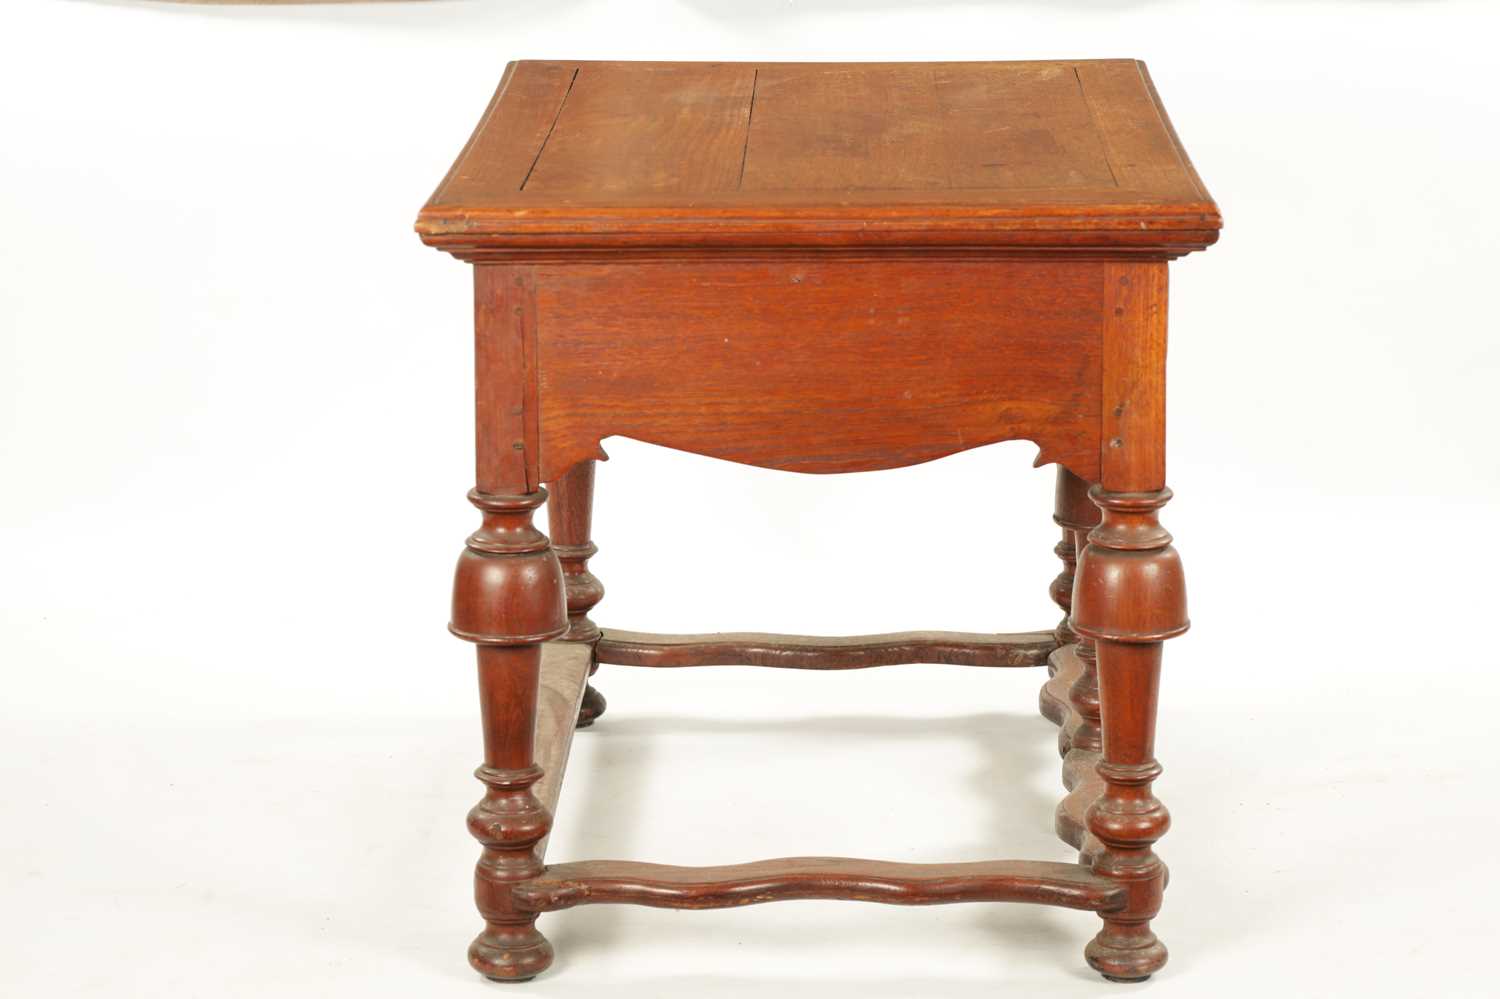 AN UNUSUAL 18TH CENTURY COLONIAL PADOUK WOOD TWO DRAWER TABLE ON BALLUSTER LEGS WITH SHAPED STRETCHE - Image 6 of 8